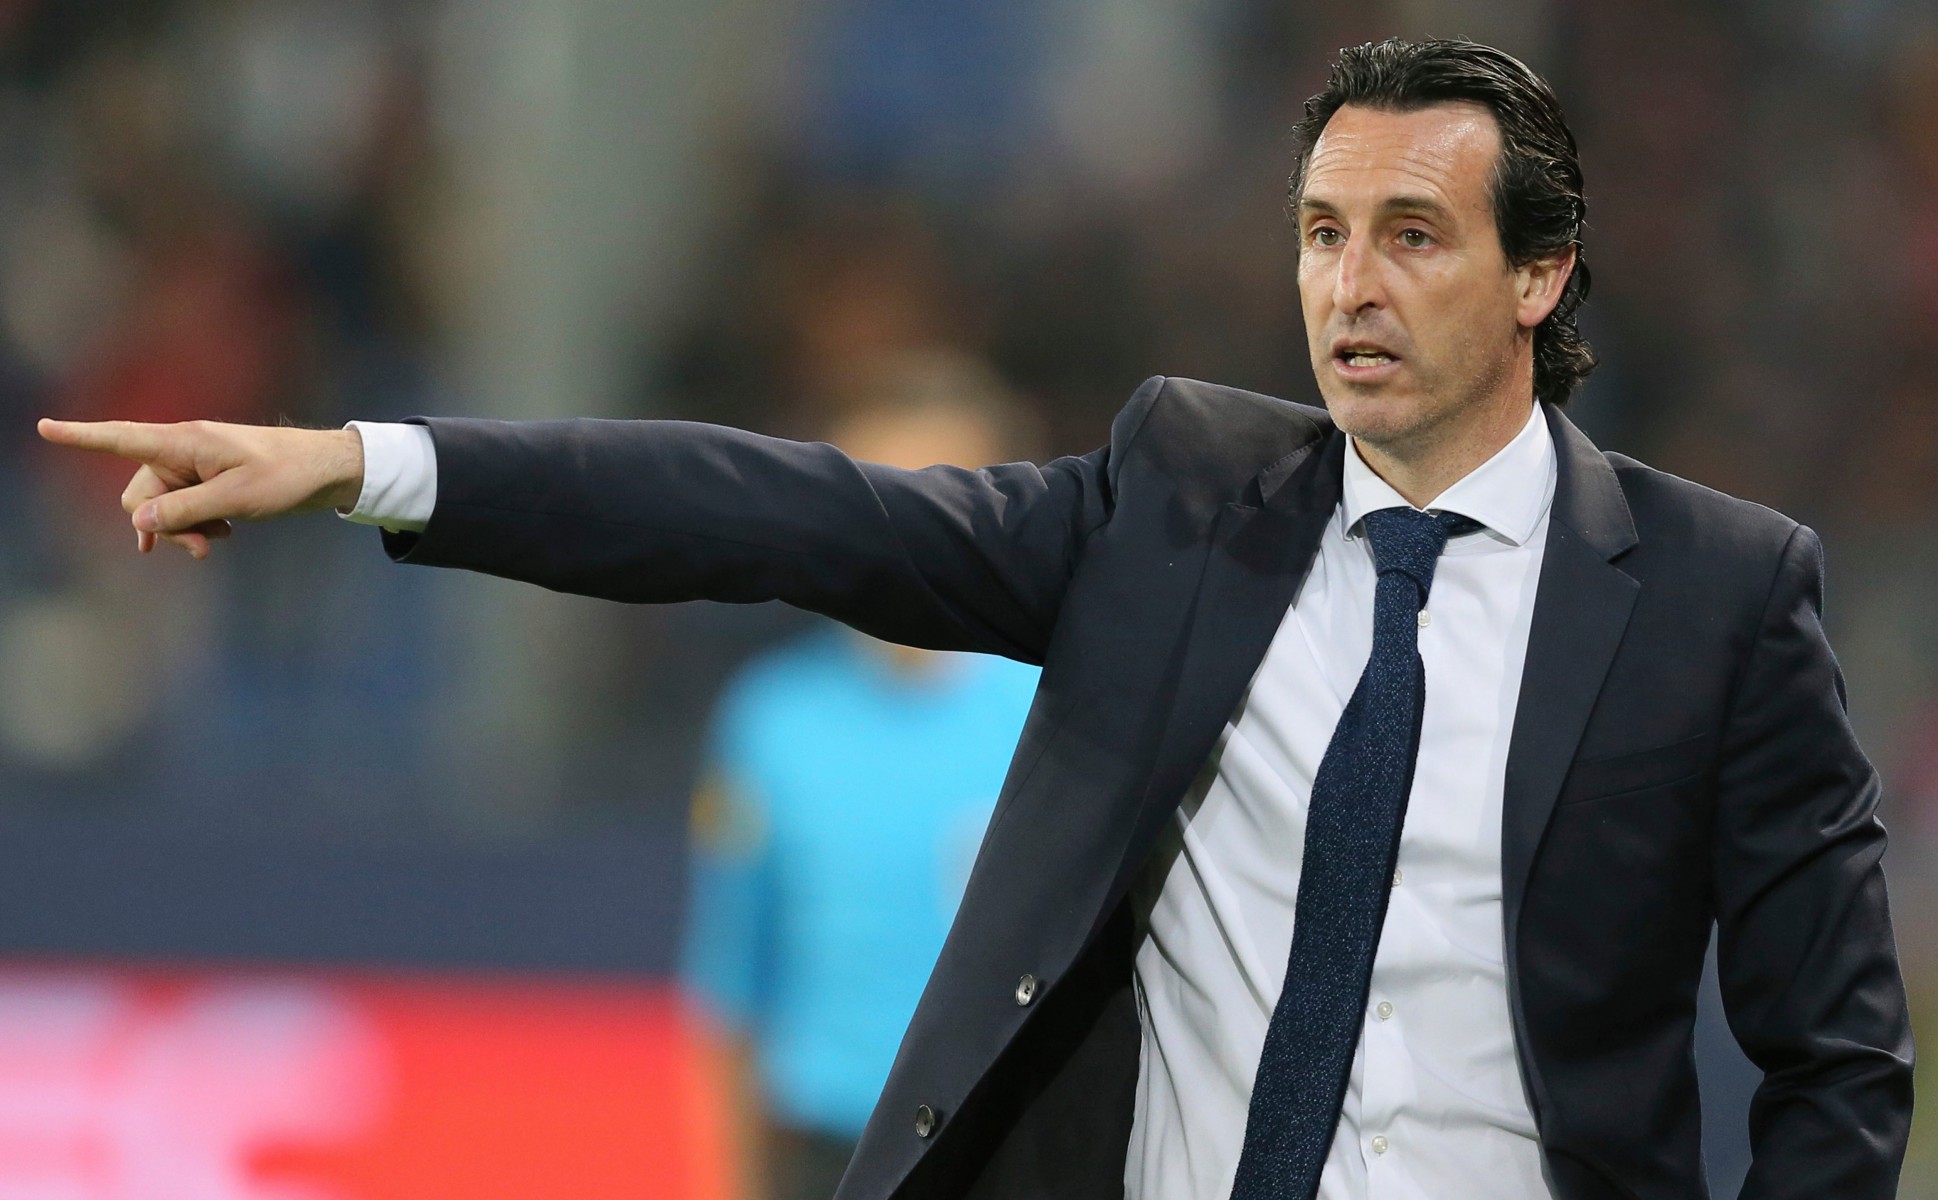 Unai Emery has been accused by some, like Jamie Carragher, of not adapting his tactics at Arsenal